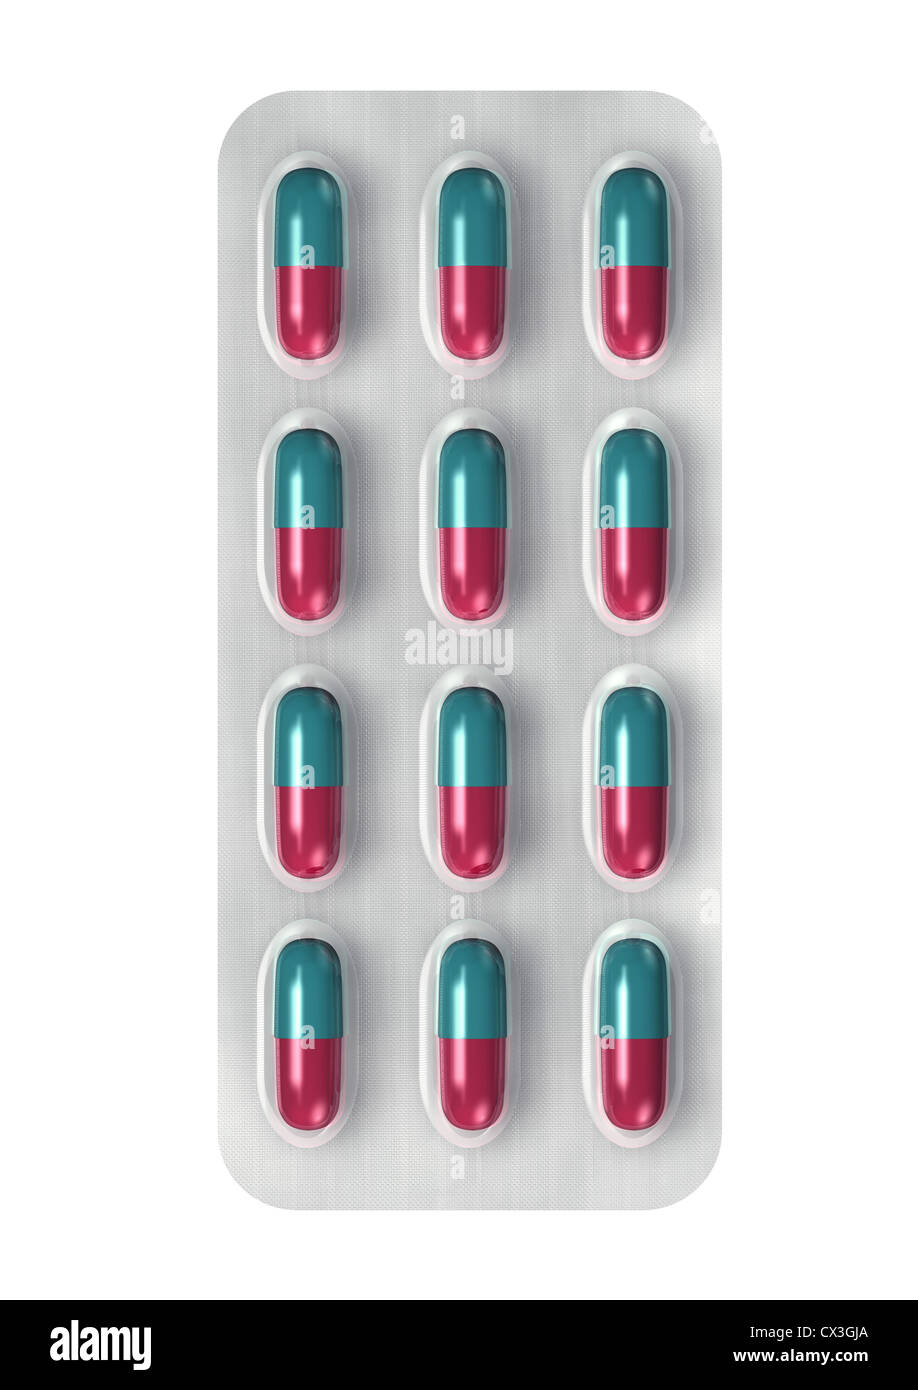 Rot-Grüne Kapseln in einer Blister Verpackung aus weiß - Red-Green Capsules with Medicine in a Blister Pack Stock Photo